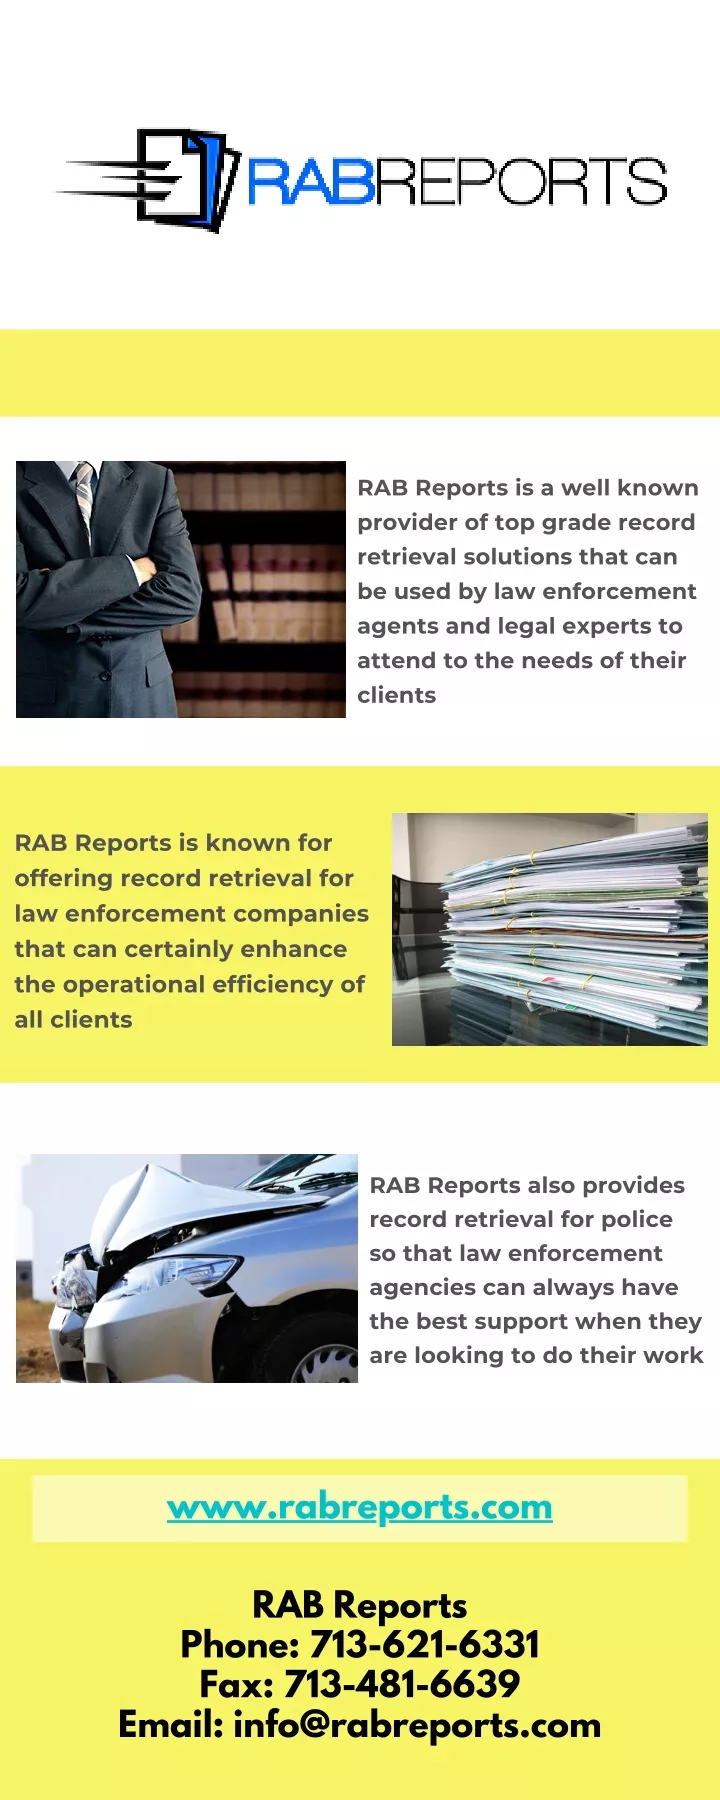 rab reports is a well known provider of top grade